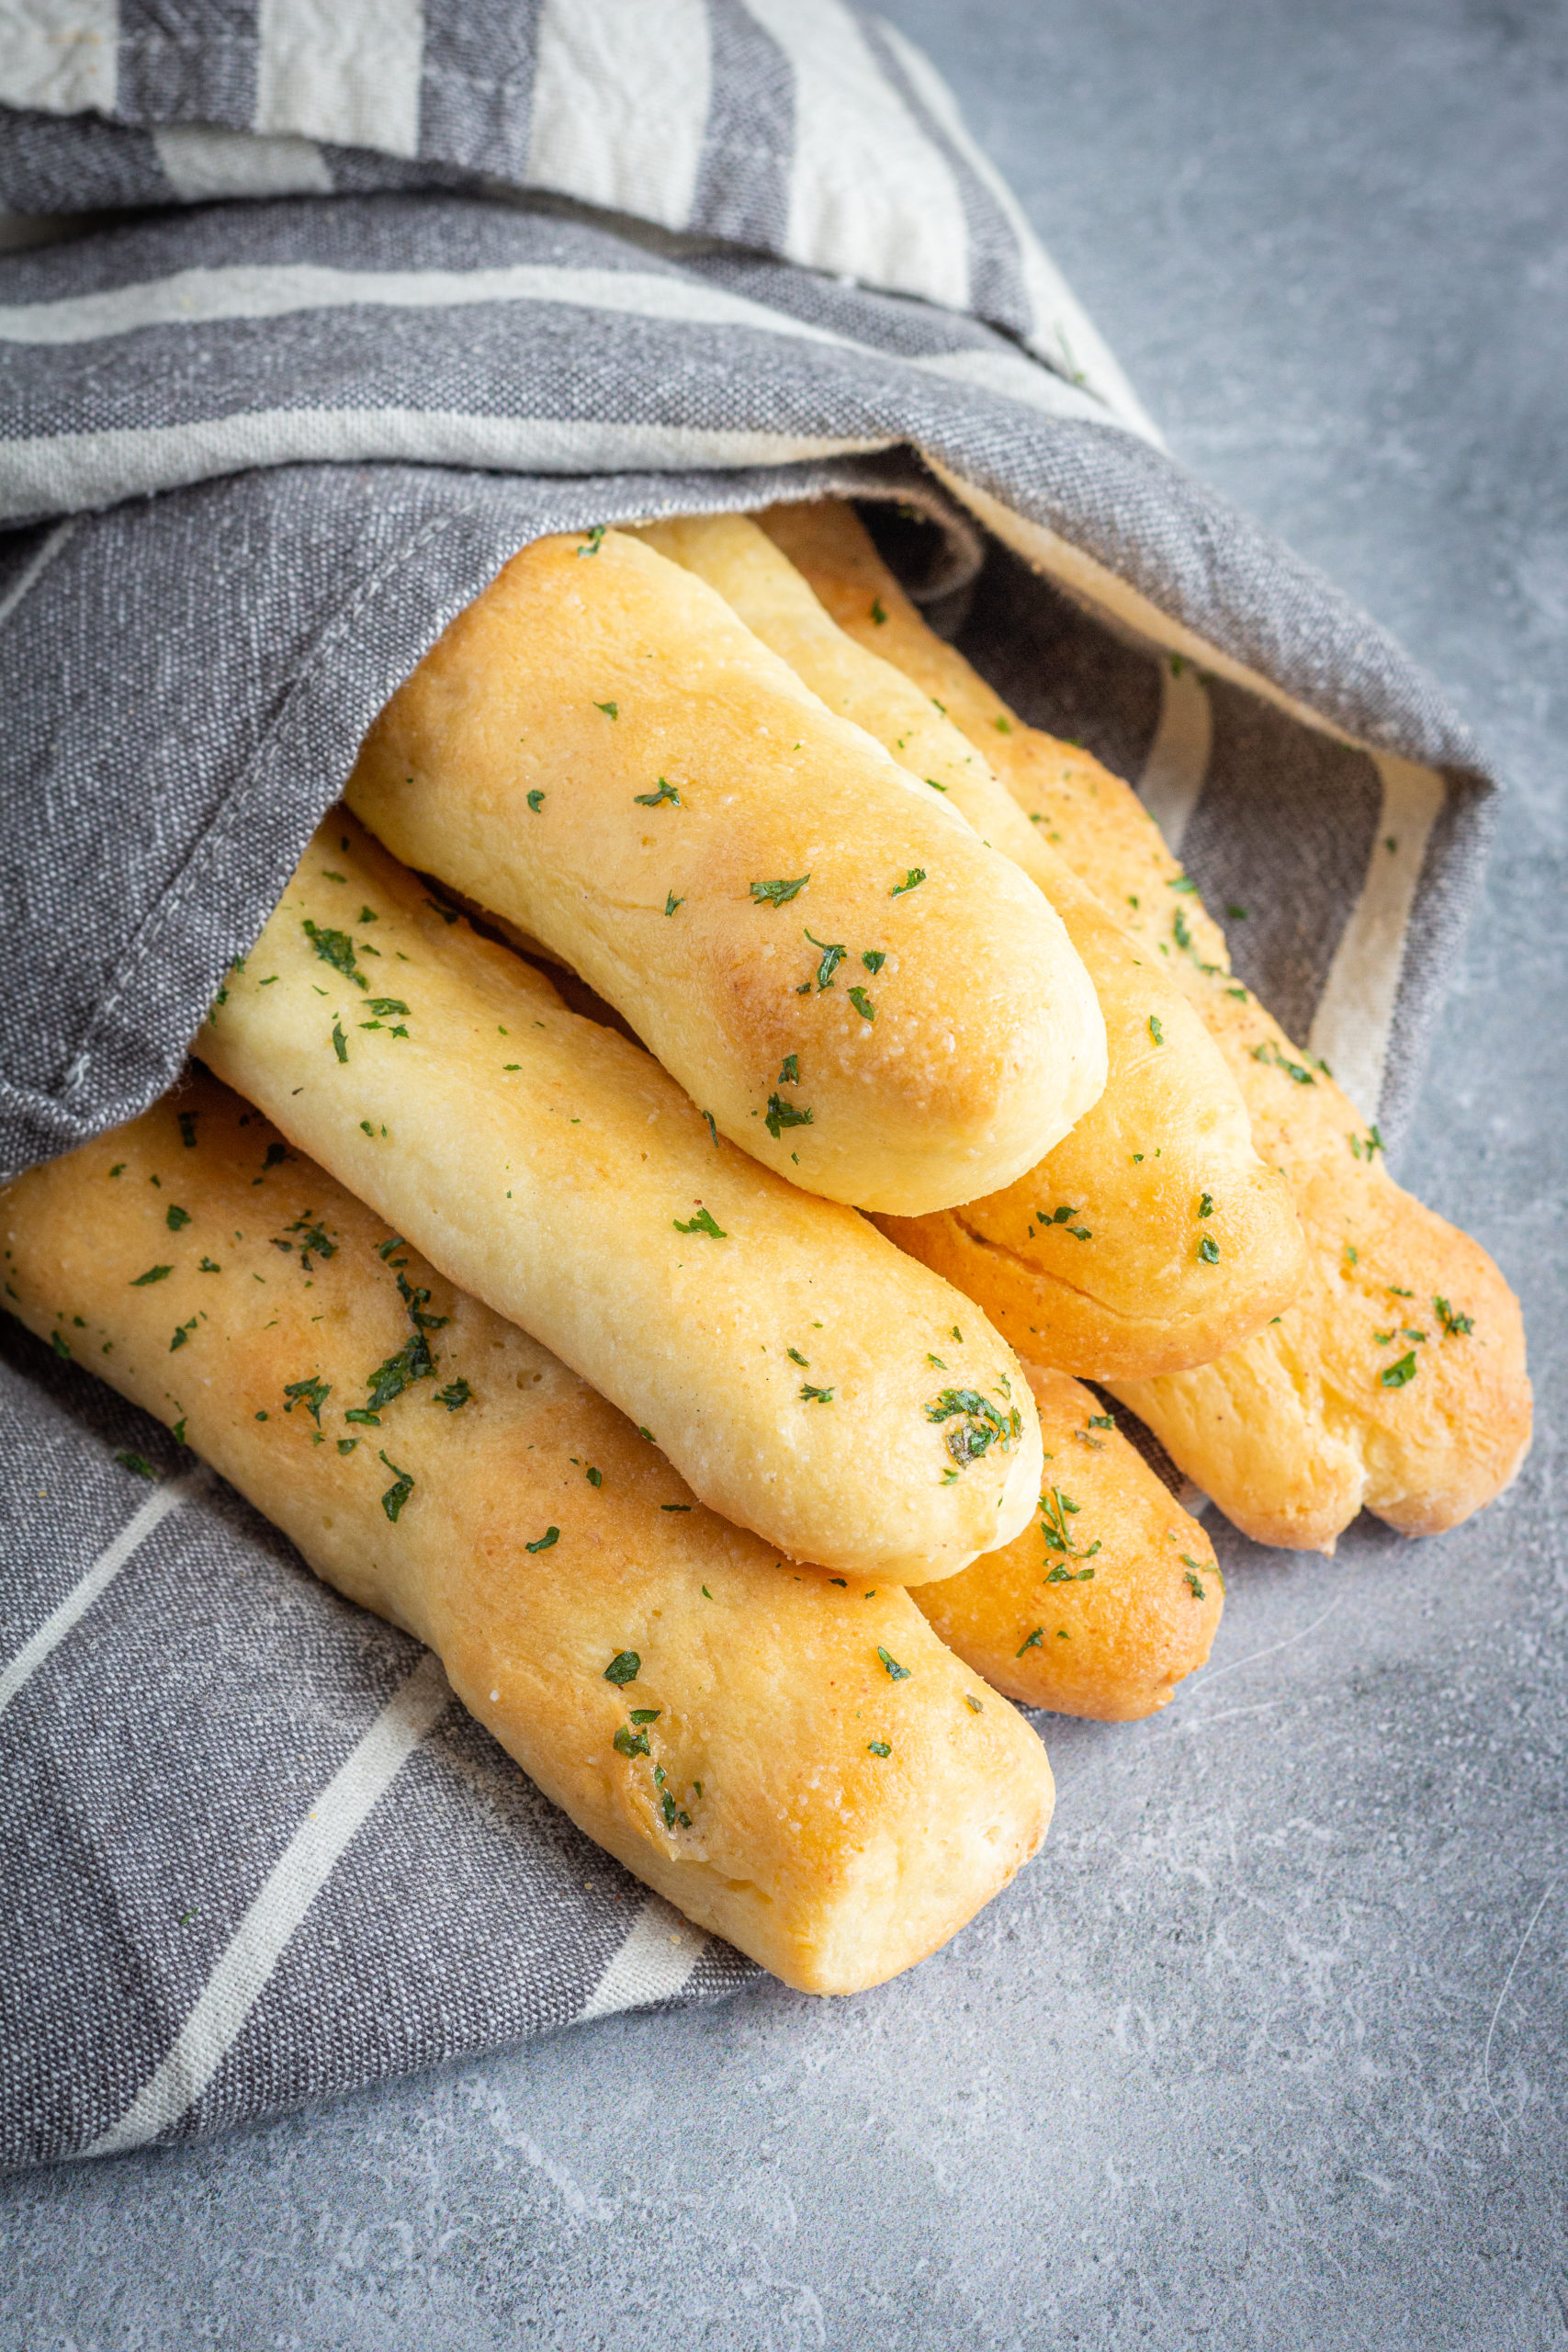 gluten free breadsticks stacked in a pyramid. They are sprinkled with parsley and wrapped in a towel.